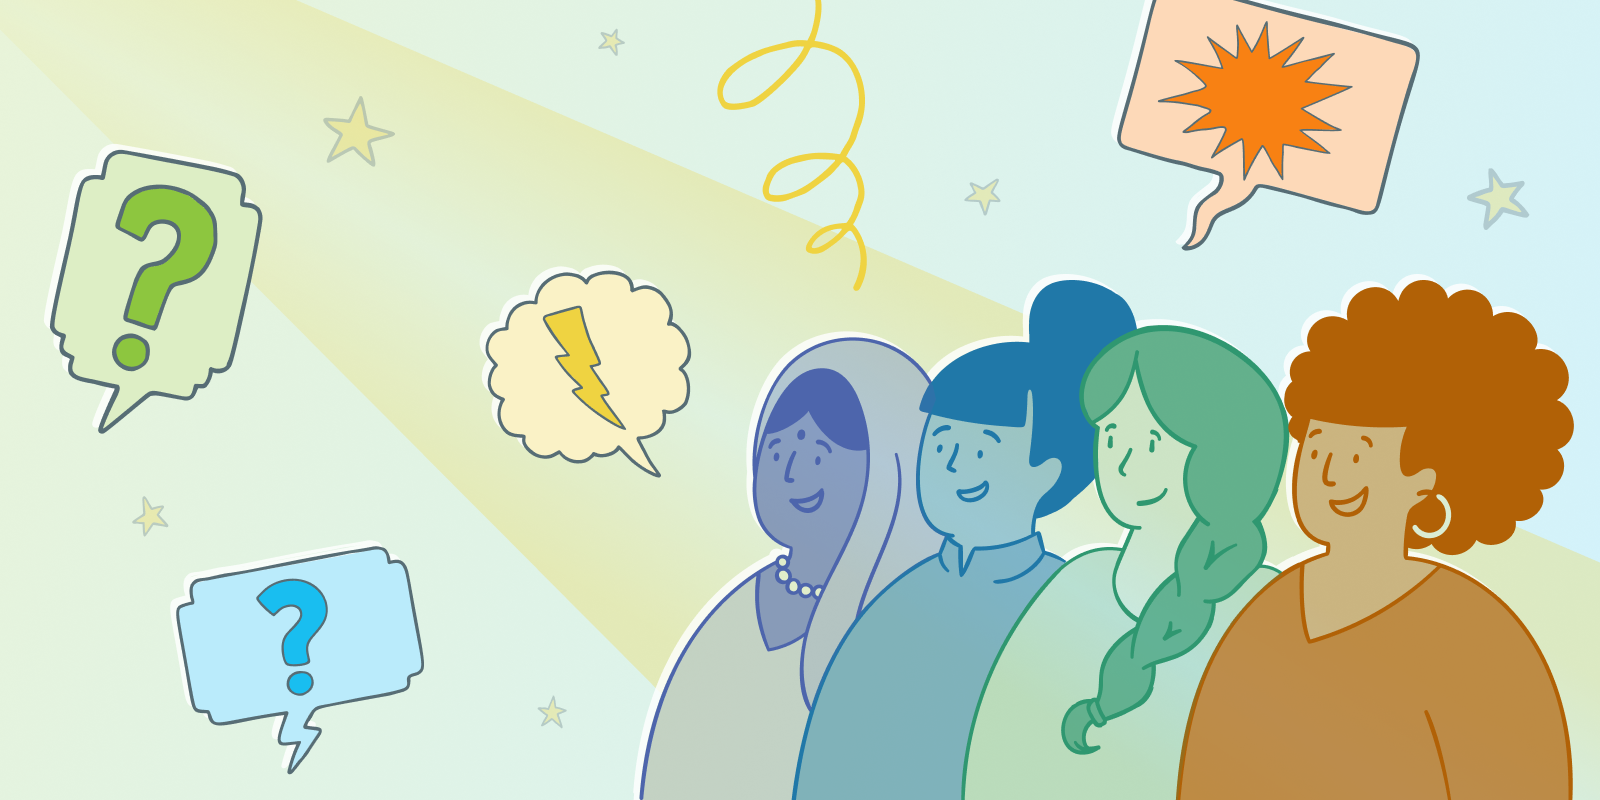 a playful illustration depicting four diverse women in a spotlight beam, with stars and q&a speech bubbles scattered around